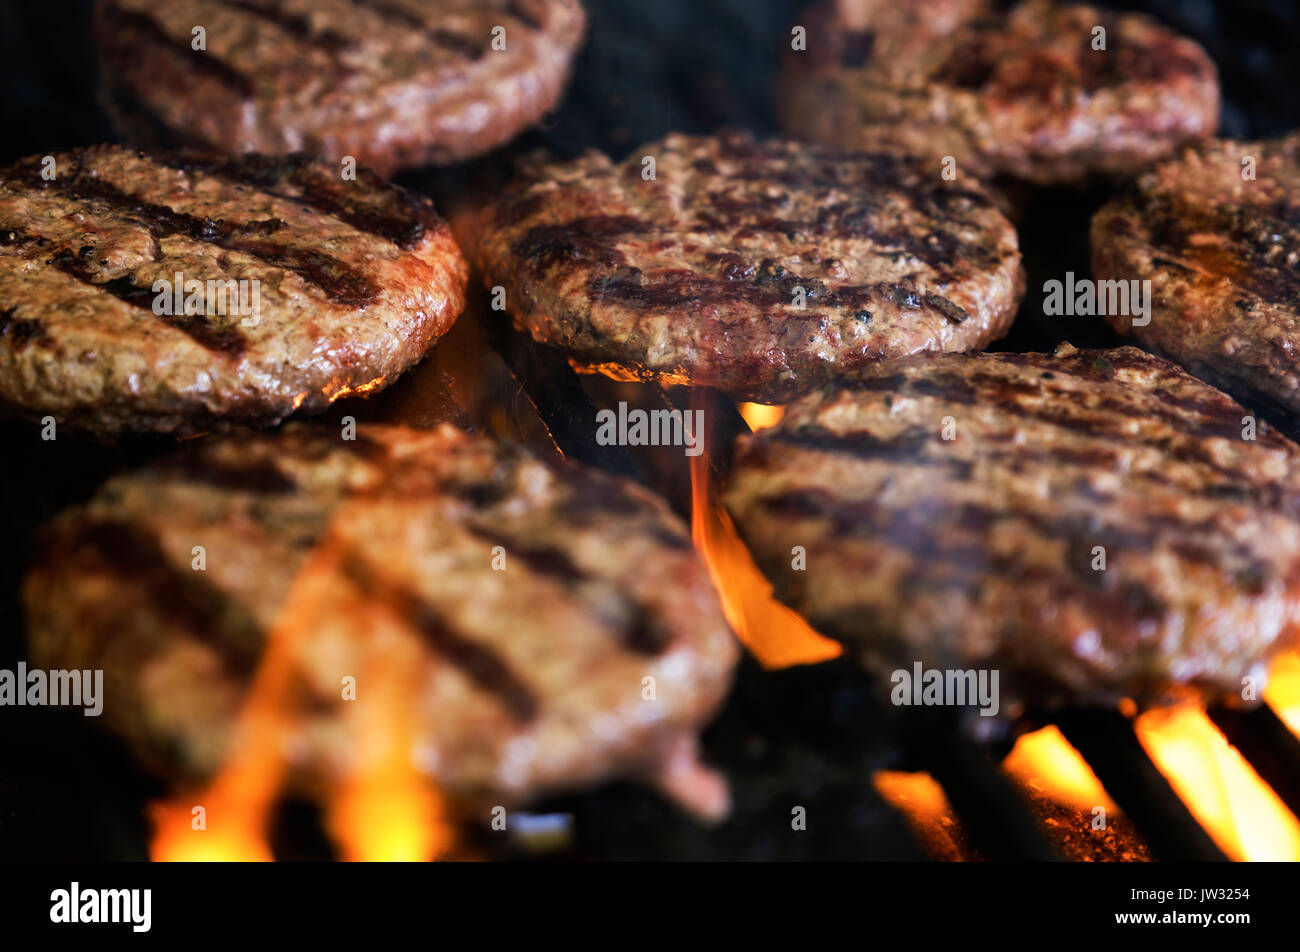 Hamburgers on barbeque grill Stock Photo